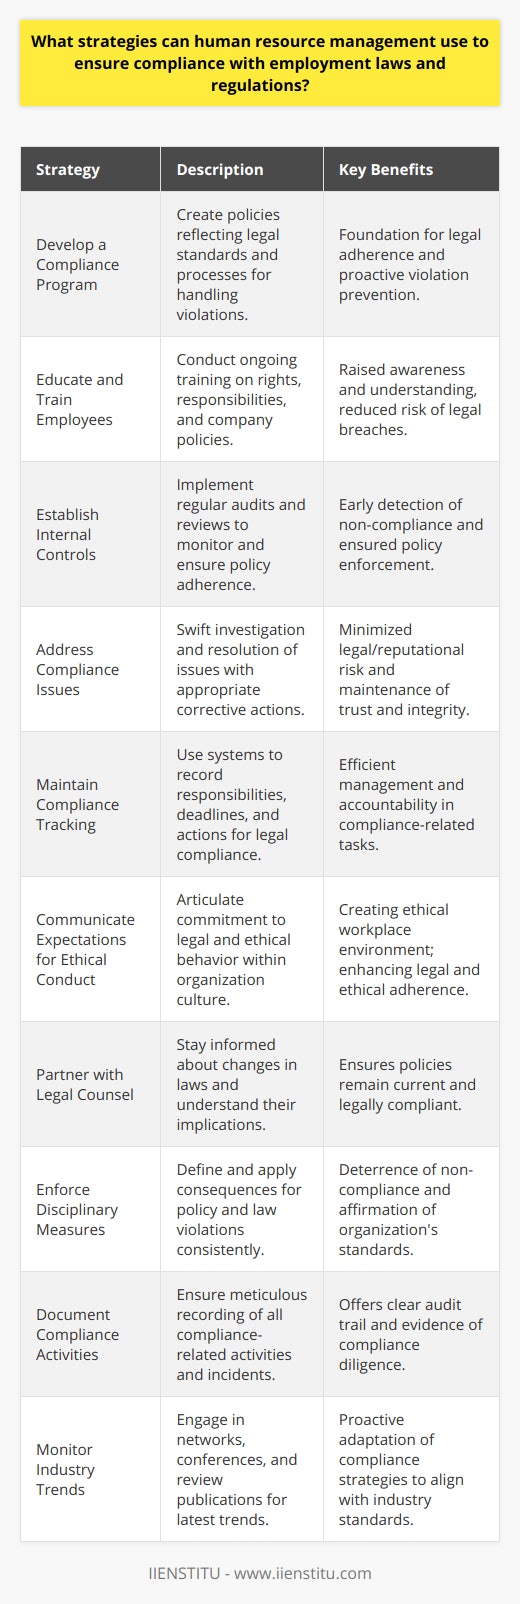 Human Resource Management (HRM) plays a crucial role in ensuring that an organization complies with the myriad of employment laws and regulations that govern the workplace. With the constant augmentation of labor laws, staying abreast of the latest changes and effectively implementing strategies to maintain compliance can seem formidable. Below are ten strategies HRM can employ to ensure their organization remains on the right side of the law:1. **Develop and Implement a Comprehensive Compliance Program:**A robust compliance program underpins an organization's ability to adhere to employment laws. HRM should craft policies that reflect current legal standards, including diversity and inclusion, wage and hour laws, and workplace safety. They should also detail the measures for handling potential violations, thus creating a strong foundation for compliance.2. **Educate and Train Employees on Applicable Laws and Regulations:**Regular training sessions inform employees of their rights and responsibilities under the law and the organization's policies. Training should be ongoing and adapt to new legislative changes as they occur. Tailored sessions for managers regarding discriminatory practices, retaliation, and harassment are also fundamental in ensuring workplace compliance.3. **Establish Effective Internal Controls and Processes to Monitor Compliance:**Internal controls are preventive measures that help to ensure policy adherence. HRM should develop procedures for regular audits, spot-checks, and reviews of compliance across various departments, ensuring that any irregularities are detected early and corrected.4. **Investigate and Promptly Address Any Compliance Issues:**When compliance issues arise, HRM must act swiftly to investigate and resolve them. This includes implementing corrective measures to remediate gaps in compliance and mitigate any potential legal or reputational damage to the organization.5. **Develop and Maintain a System for Tracking Compliance-Related Activities:**Utilizing a system that chronicles compliance responsibilities, deadlines, and completed actions can help HRM in monitoring adherence to employment laws. A systematic approach enables HR to manage compliance tasks efficiently and effectively.6. **Establish and Communicate Expectations for Compliance and Ethical Conduct:**Creating a culture of compliance and ethics within the organization goes a long way toward ensuring adherence to the law. HRM should clearly articulate to all employees the company's commitment to lawful and ethical behavior, reinforcing expectations and leading by example.7. **Partner with Legal Counsel to Monitor Changes in Employment Laws and Regulations:**Staying current with legal changes is pivotal. Collaborating with legal experts or in-house counsel can help HRM understand the implications of new laws and update organizational policies accordingly.8. **Develop and Enforce Appropriate Disciplinary Measures for Non-Compliance:**Clearly defined consequences for violations of company policies and laws underline their importance. Disciplinary measures should be consistently applied and can include counseling, retraining, warnings, or even termination, depending on the severity of the non-compliance.9. **Develop Policies and Procedures to Document Compliance-Related Activities:**Documentation is a critical aspect of compliance. HRM should ensure that all compliance-related activities, such as training attendance or incident reports, are meticulously documented. This not only provides a clear audit trail but also serves as evidence of due diligence in the face of any legal challenges.10. **Monitor Industry Trends and Best Practices in Employment Law Compliance:**Understanding the enforcement trends and best practices can help organizations proactively adjust their compliance strategies. This entails attending relevant HR conferences, engaging in professional HR networks like IIENSTITU with networking opportunities, and reviewing industry publications to stay informed.Admittedly, each organization is unique, and the application of these strategies may vary. However, consistent application of these tenets of compliance will help mitigate legal risks and foster a culture that values lawful conduct, thereby positioning the organization as an employer of choice and a responsible corporate citizen.